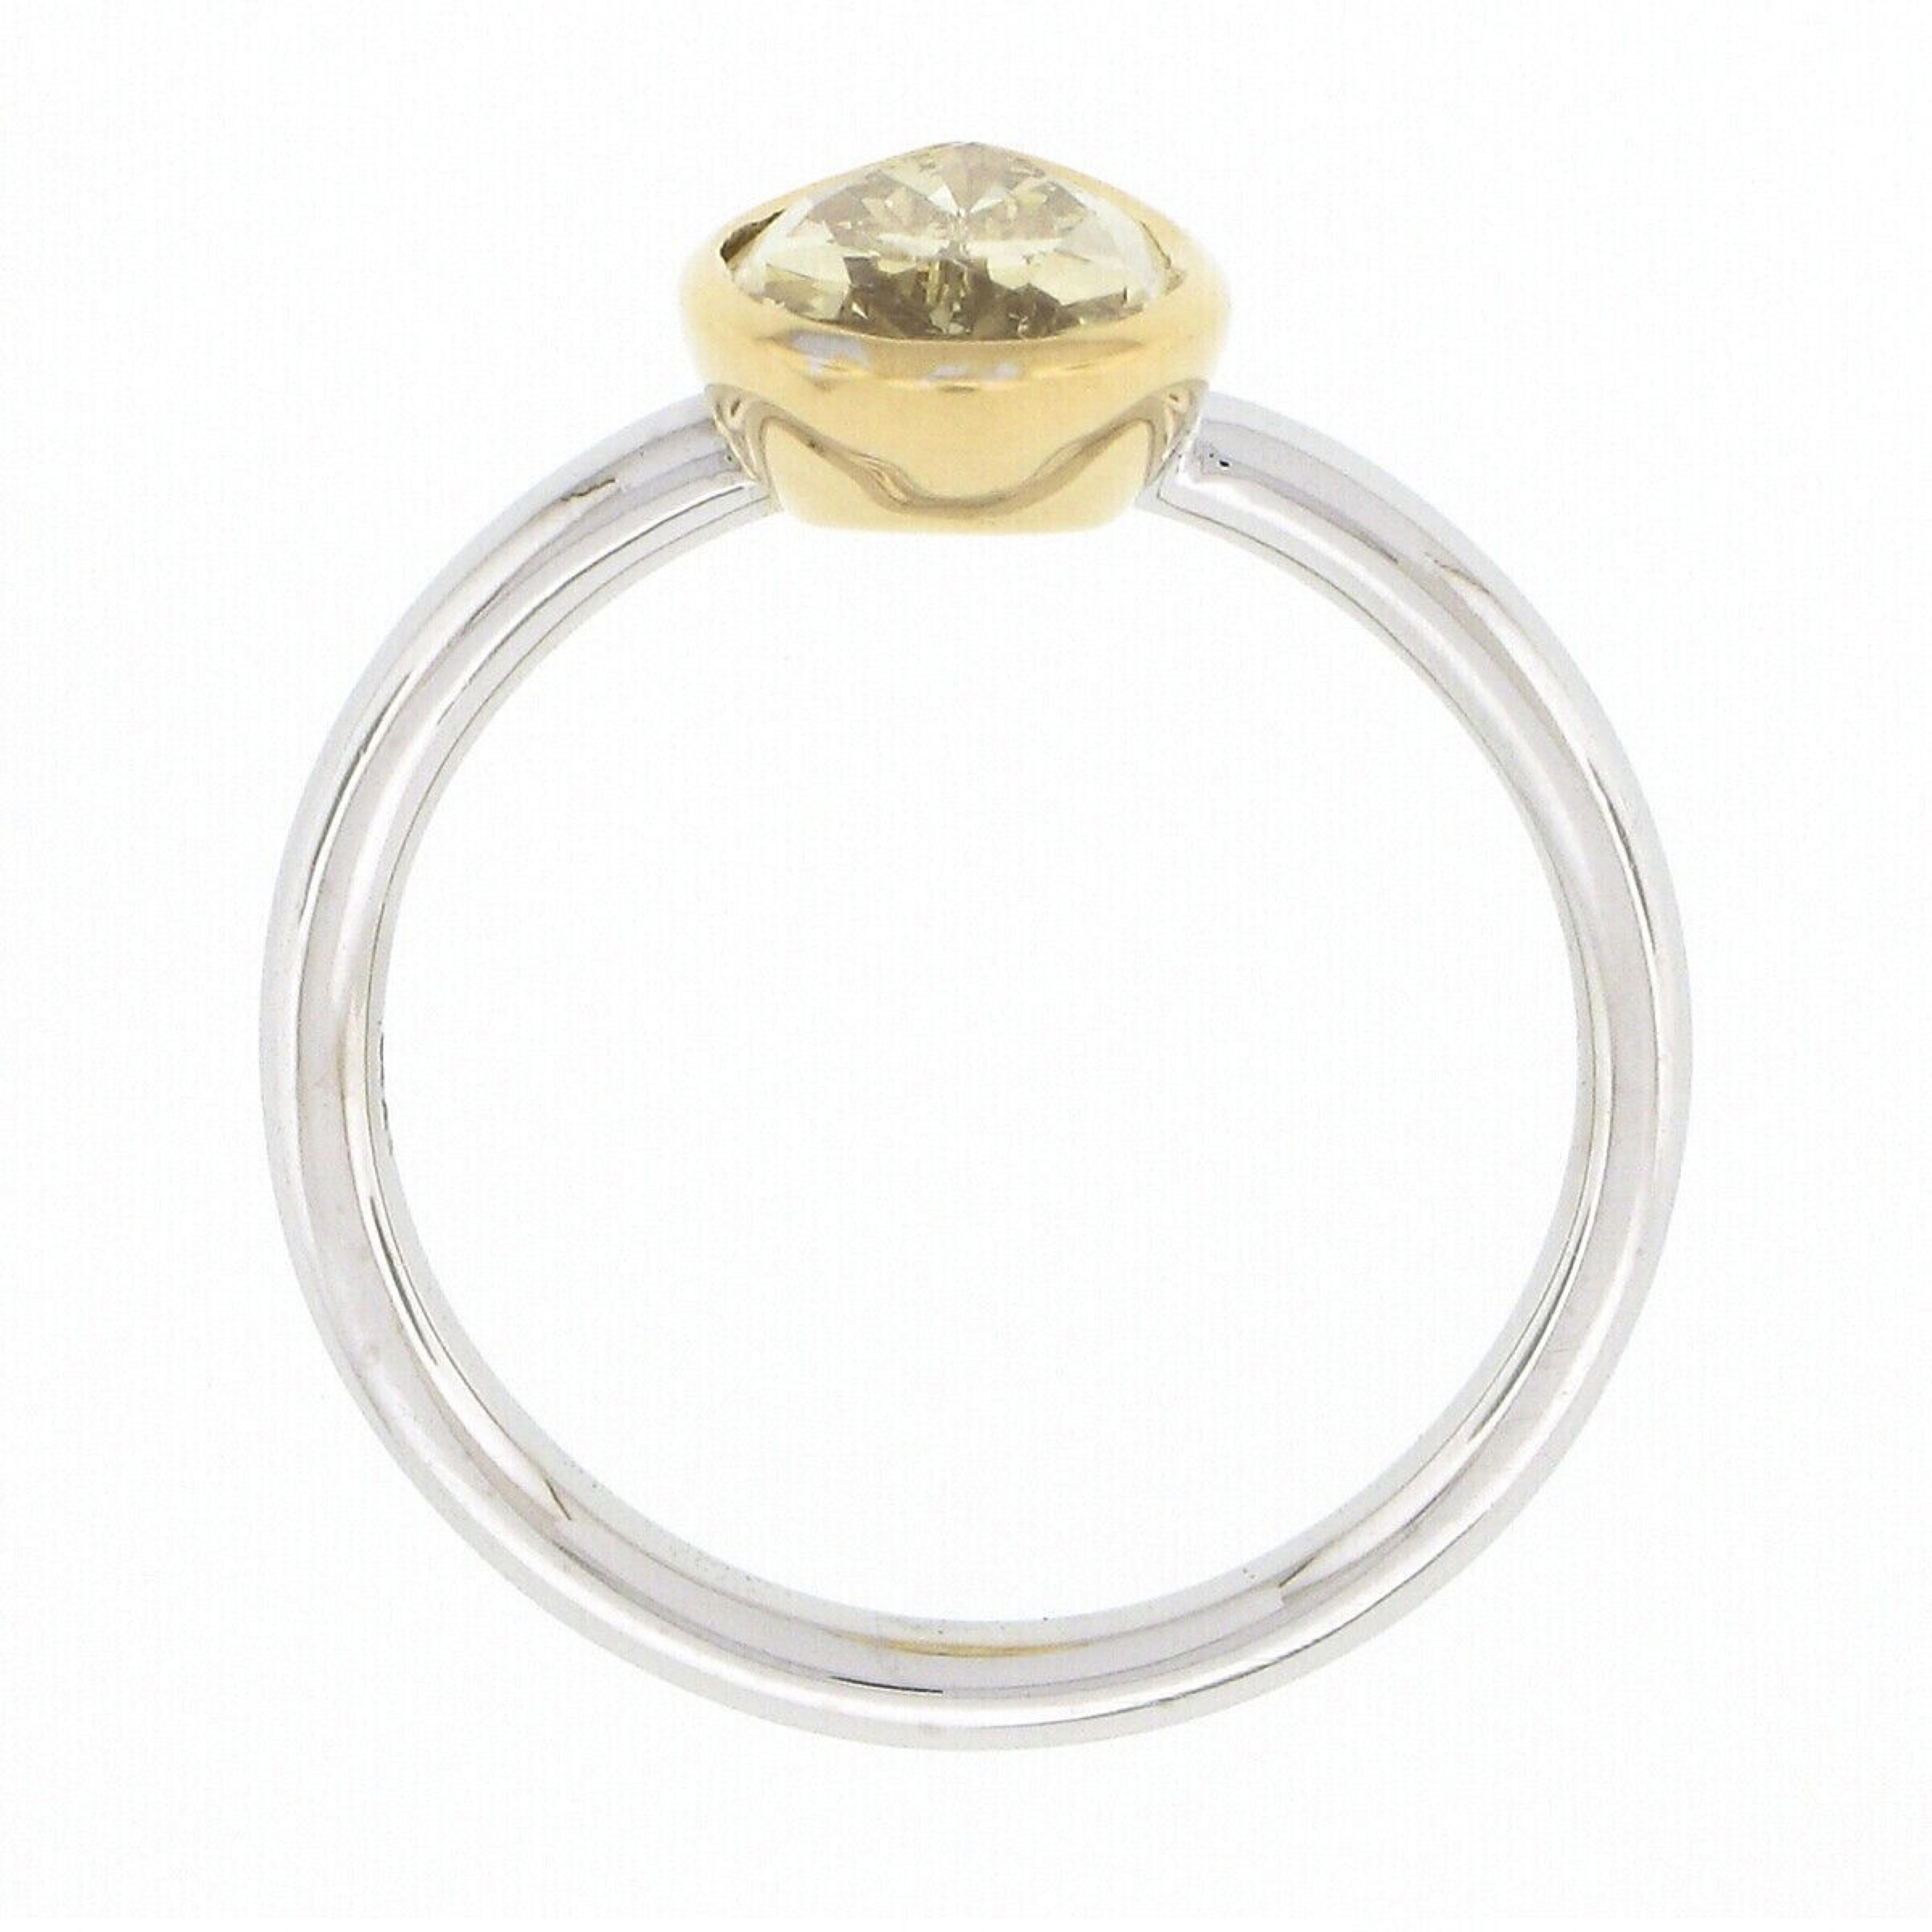 NEW Platinum GIA Fancy Yellow Pear Diamond Gold Bezel Solitaire Engagement Ring 4